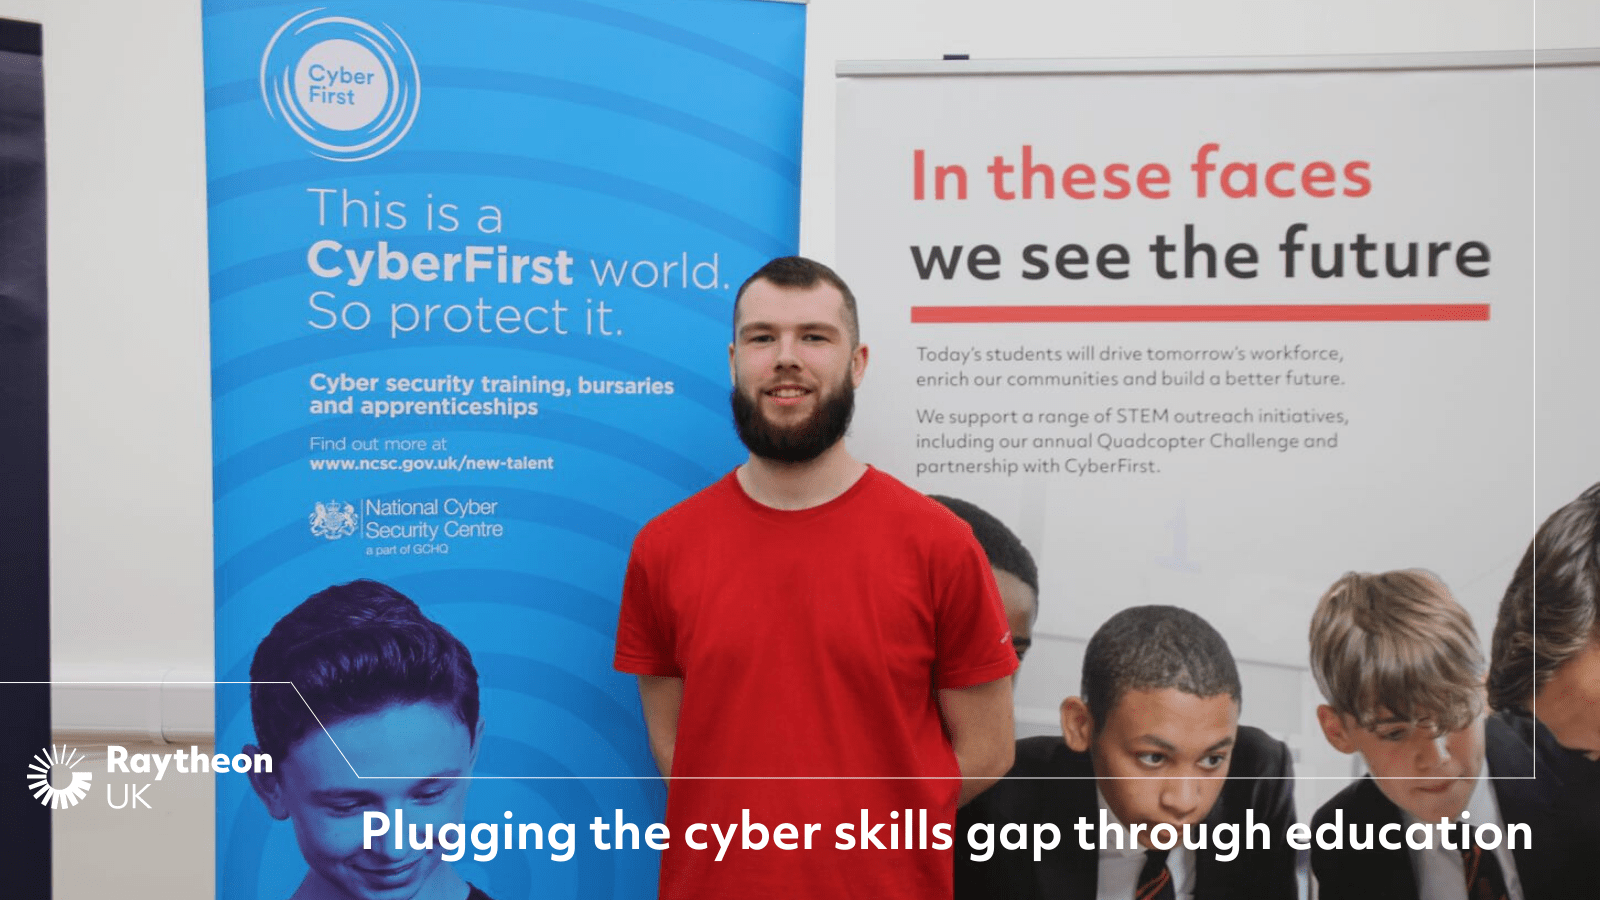 A man in a red t-shirt stands in front of a CyberFirst Schools banner